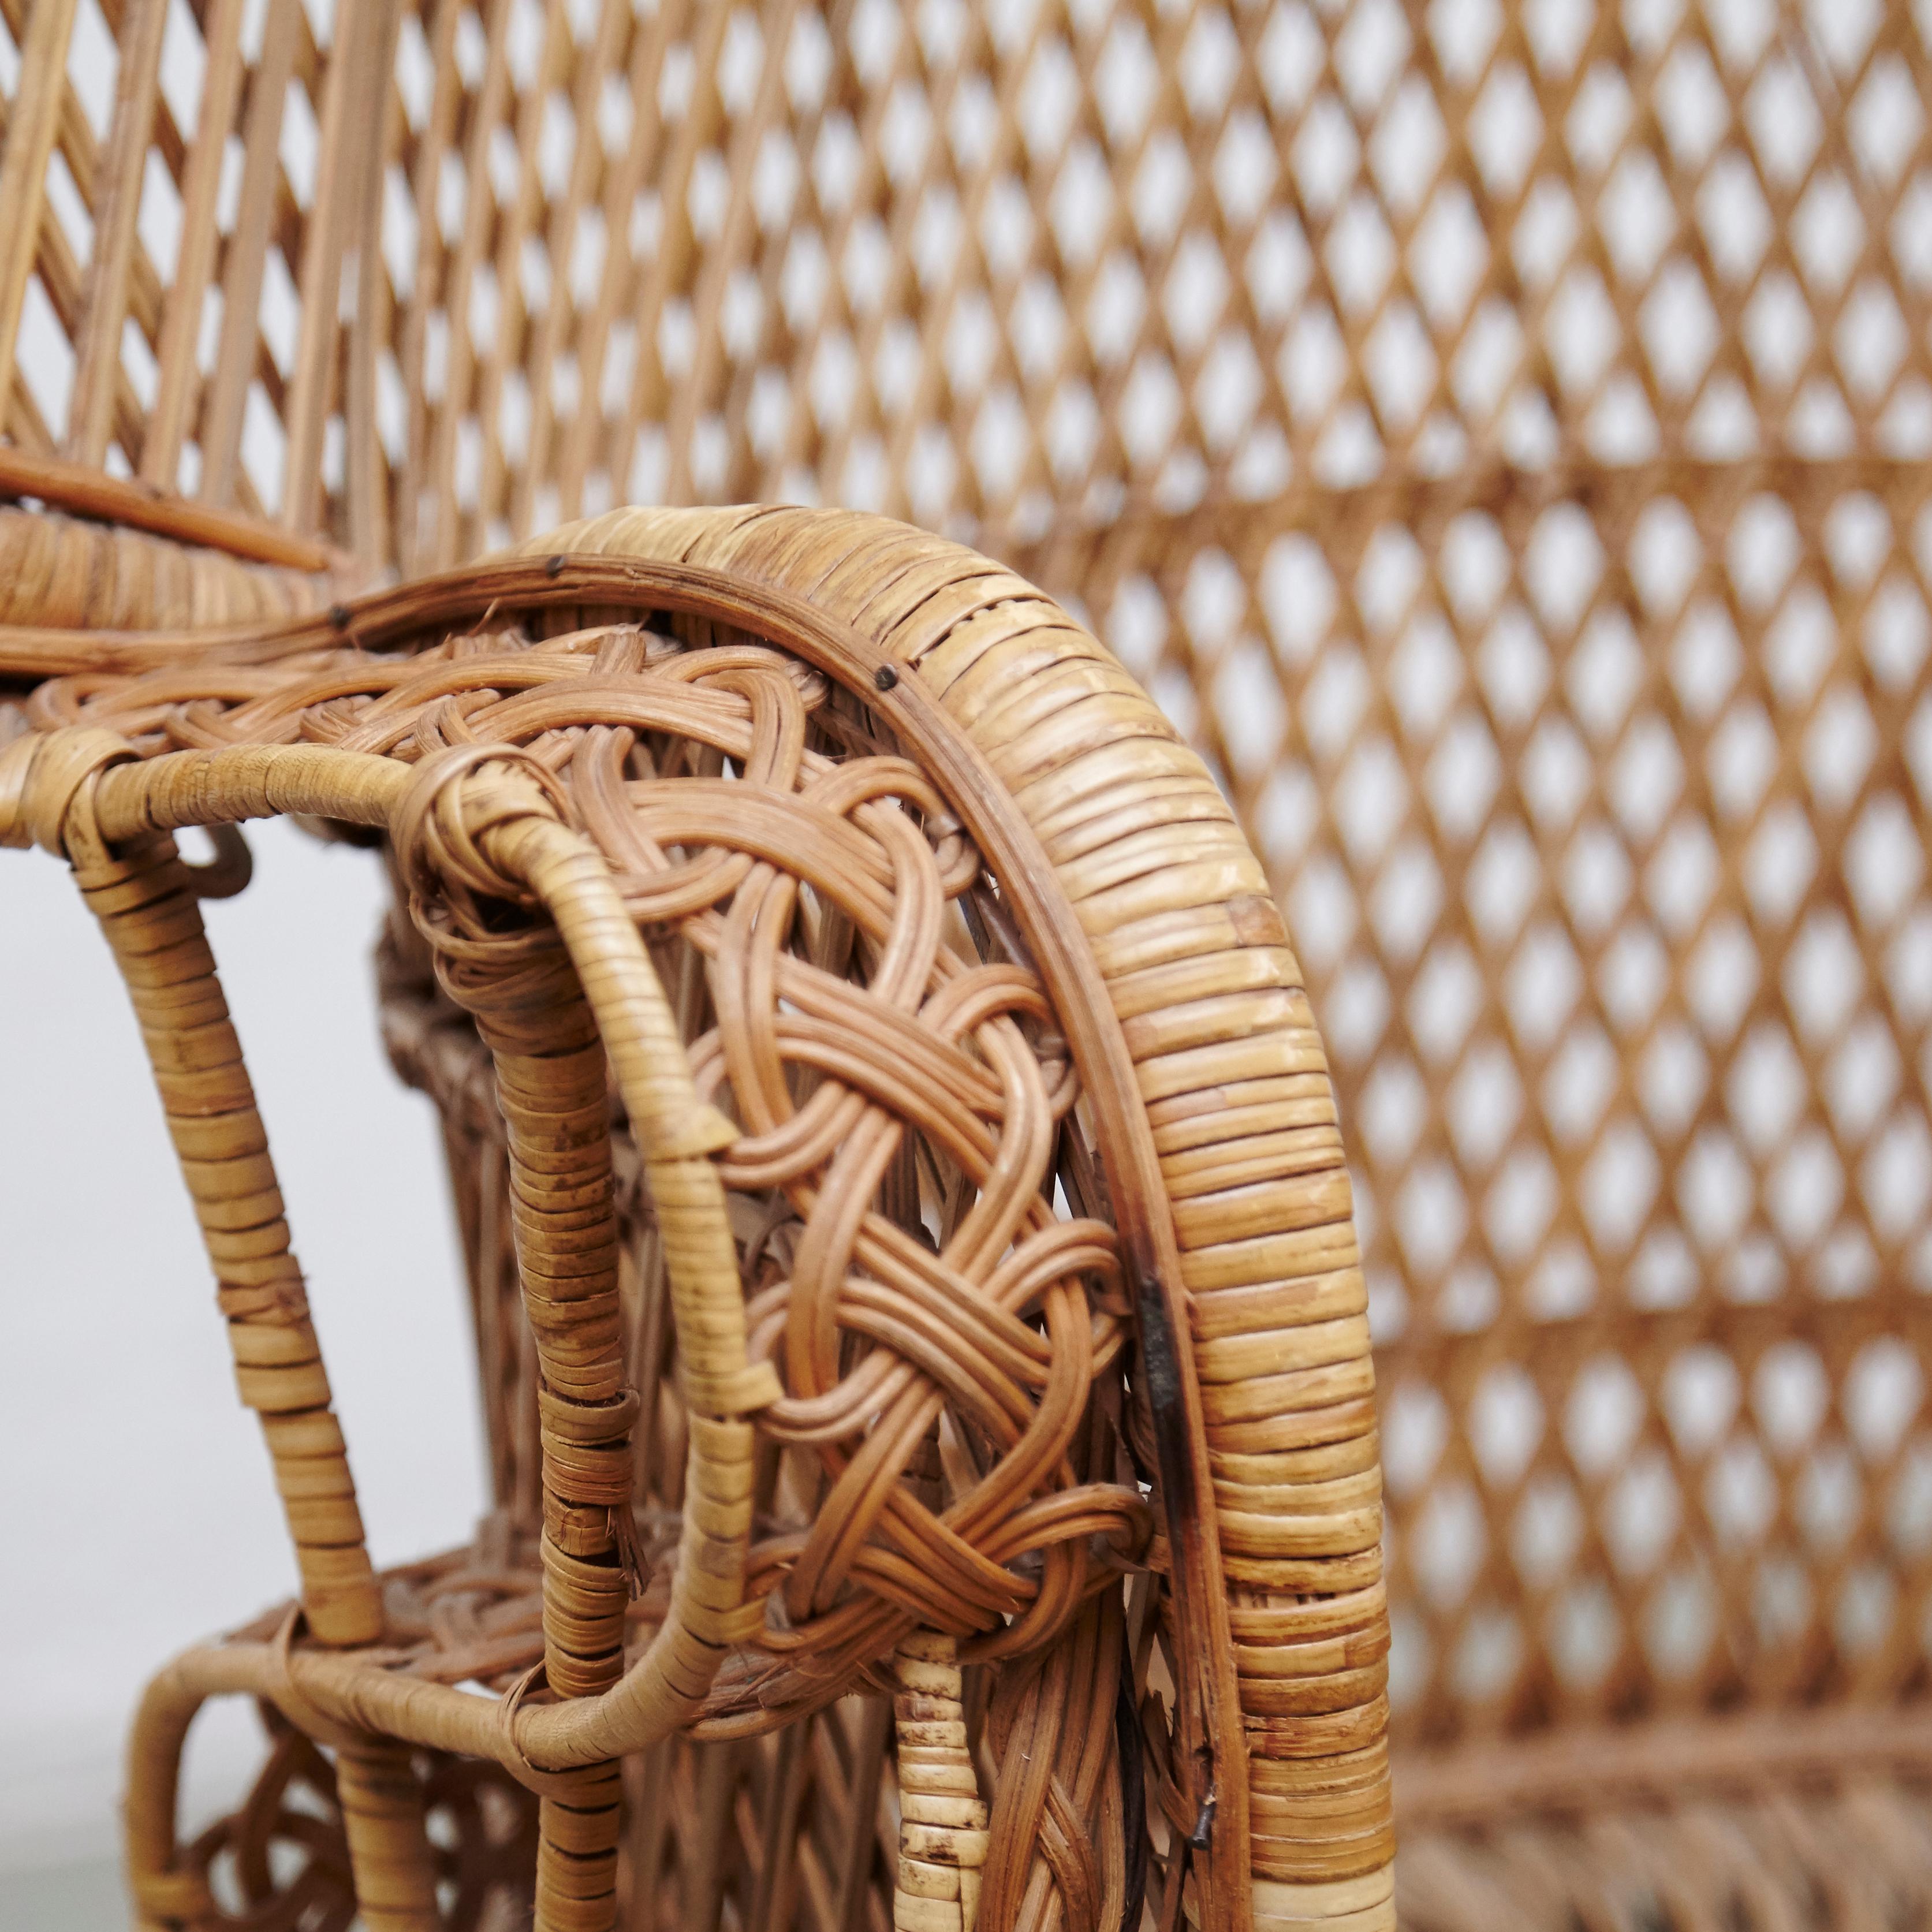 large wicker chair